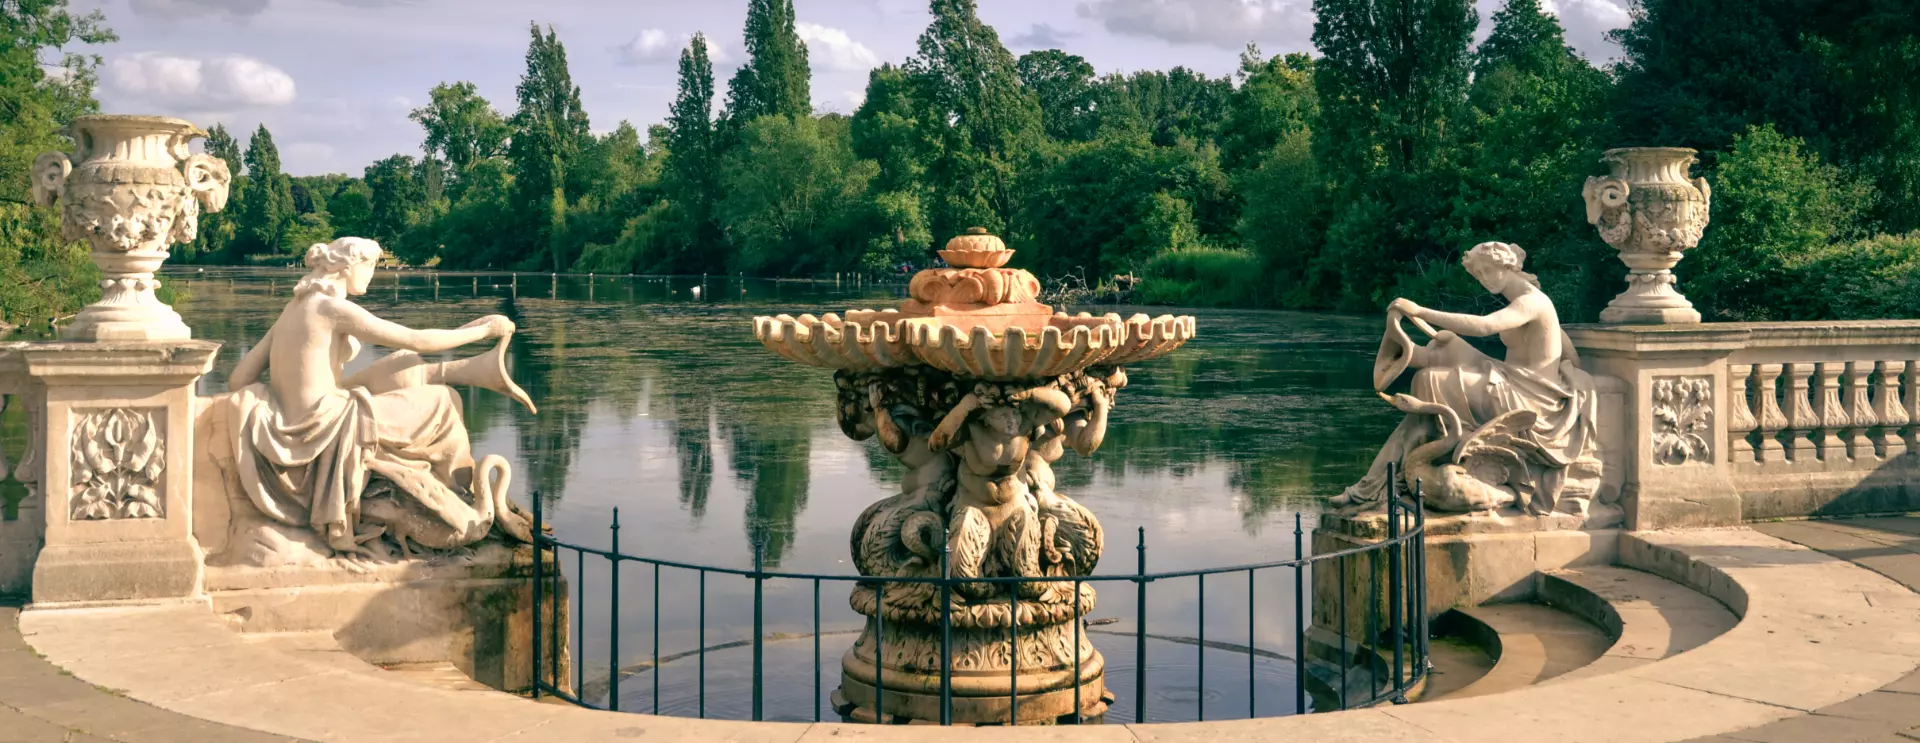 A beautiful scene of the Italian Gardens in Hyde Park, featuring lush greenery, serene water features, and classical sculptures.